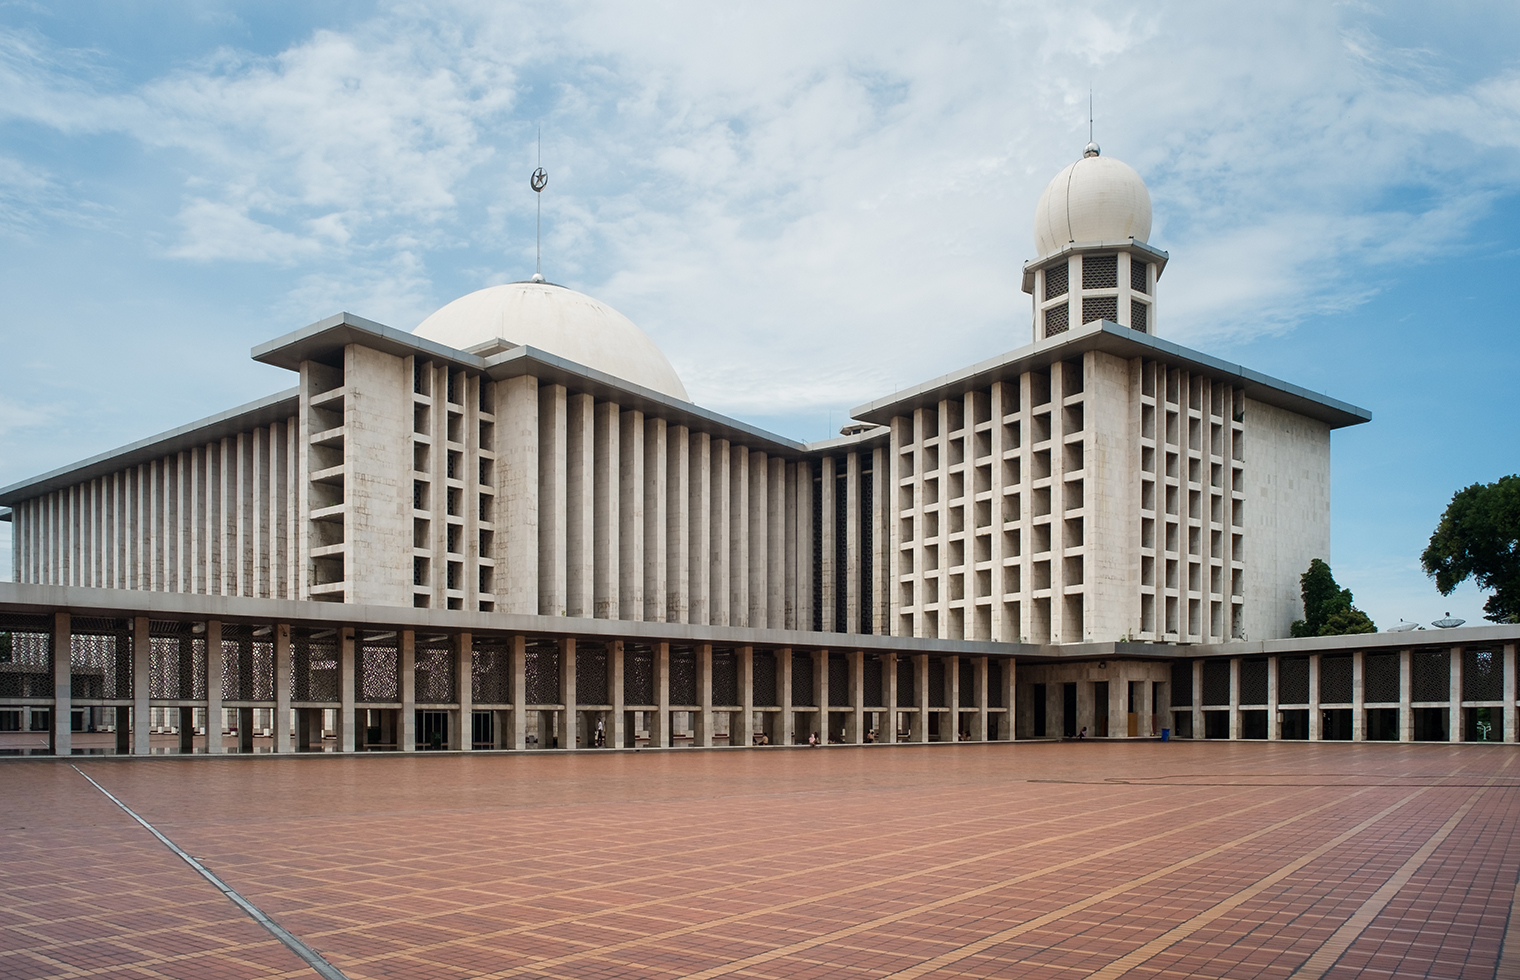 Istiqlal Mosque Marks Transition of Indonesia’s Architecture